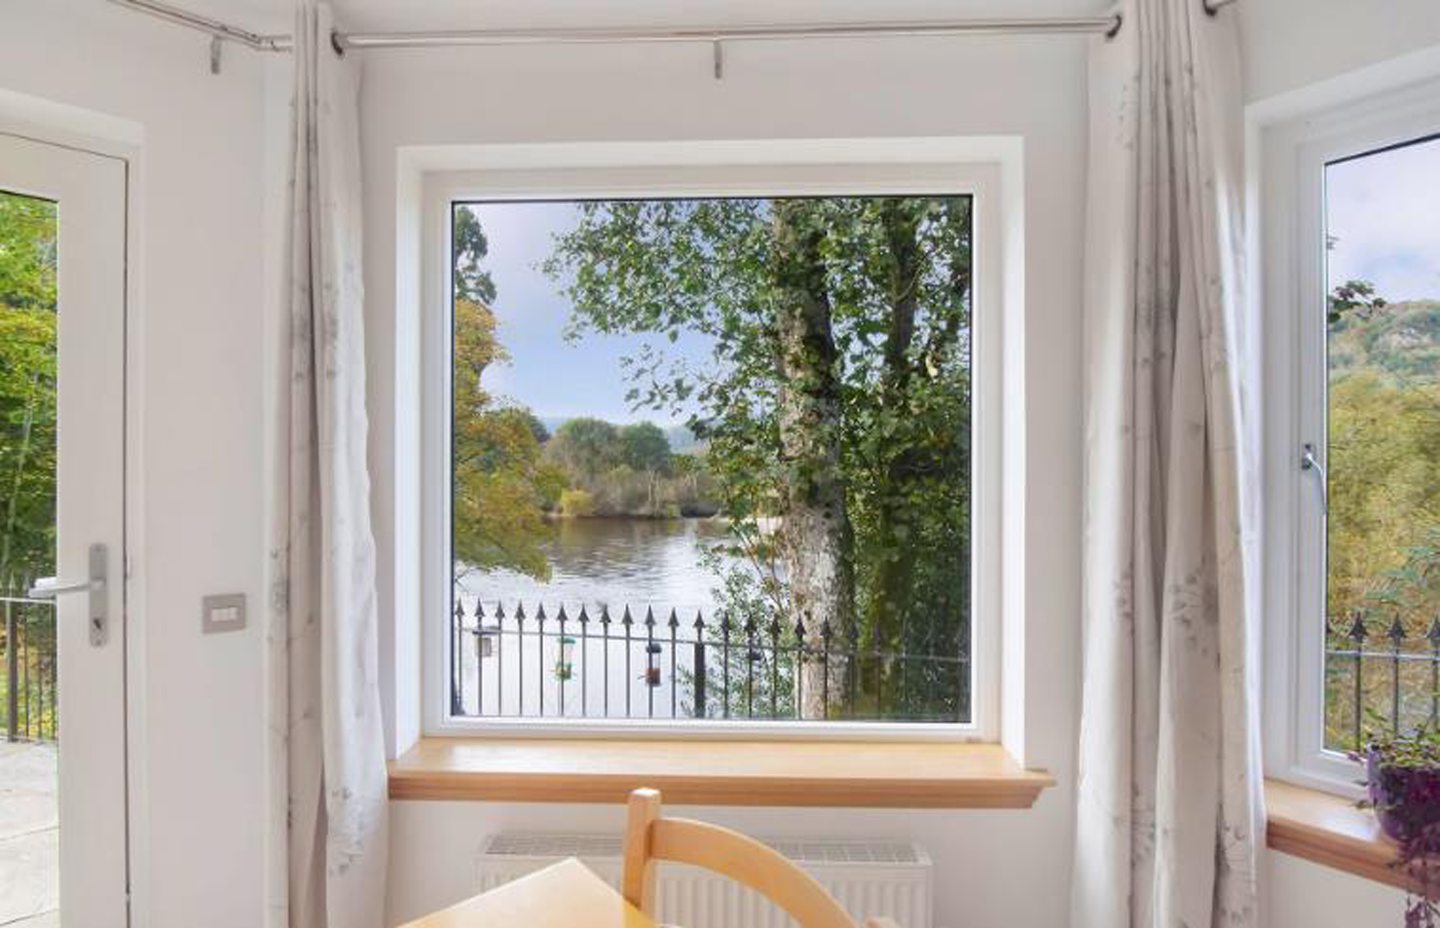 Views of the River Tay from inside the property.